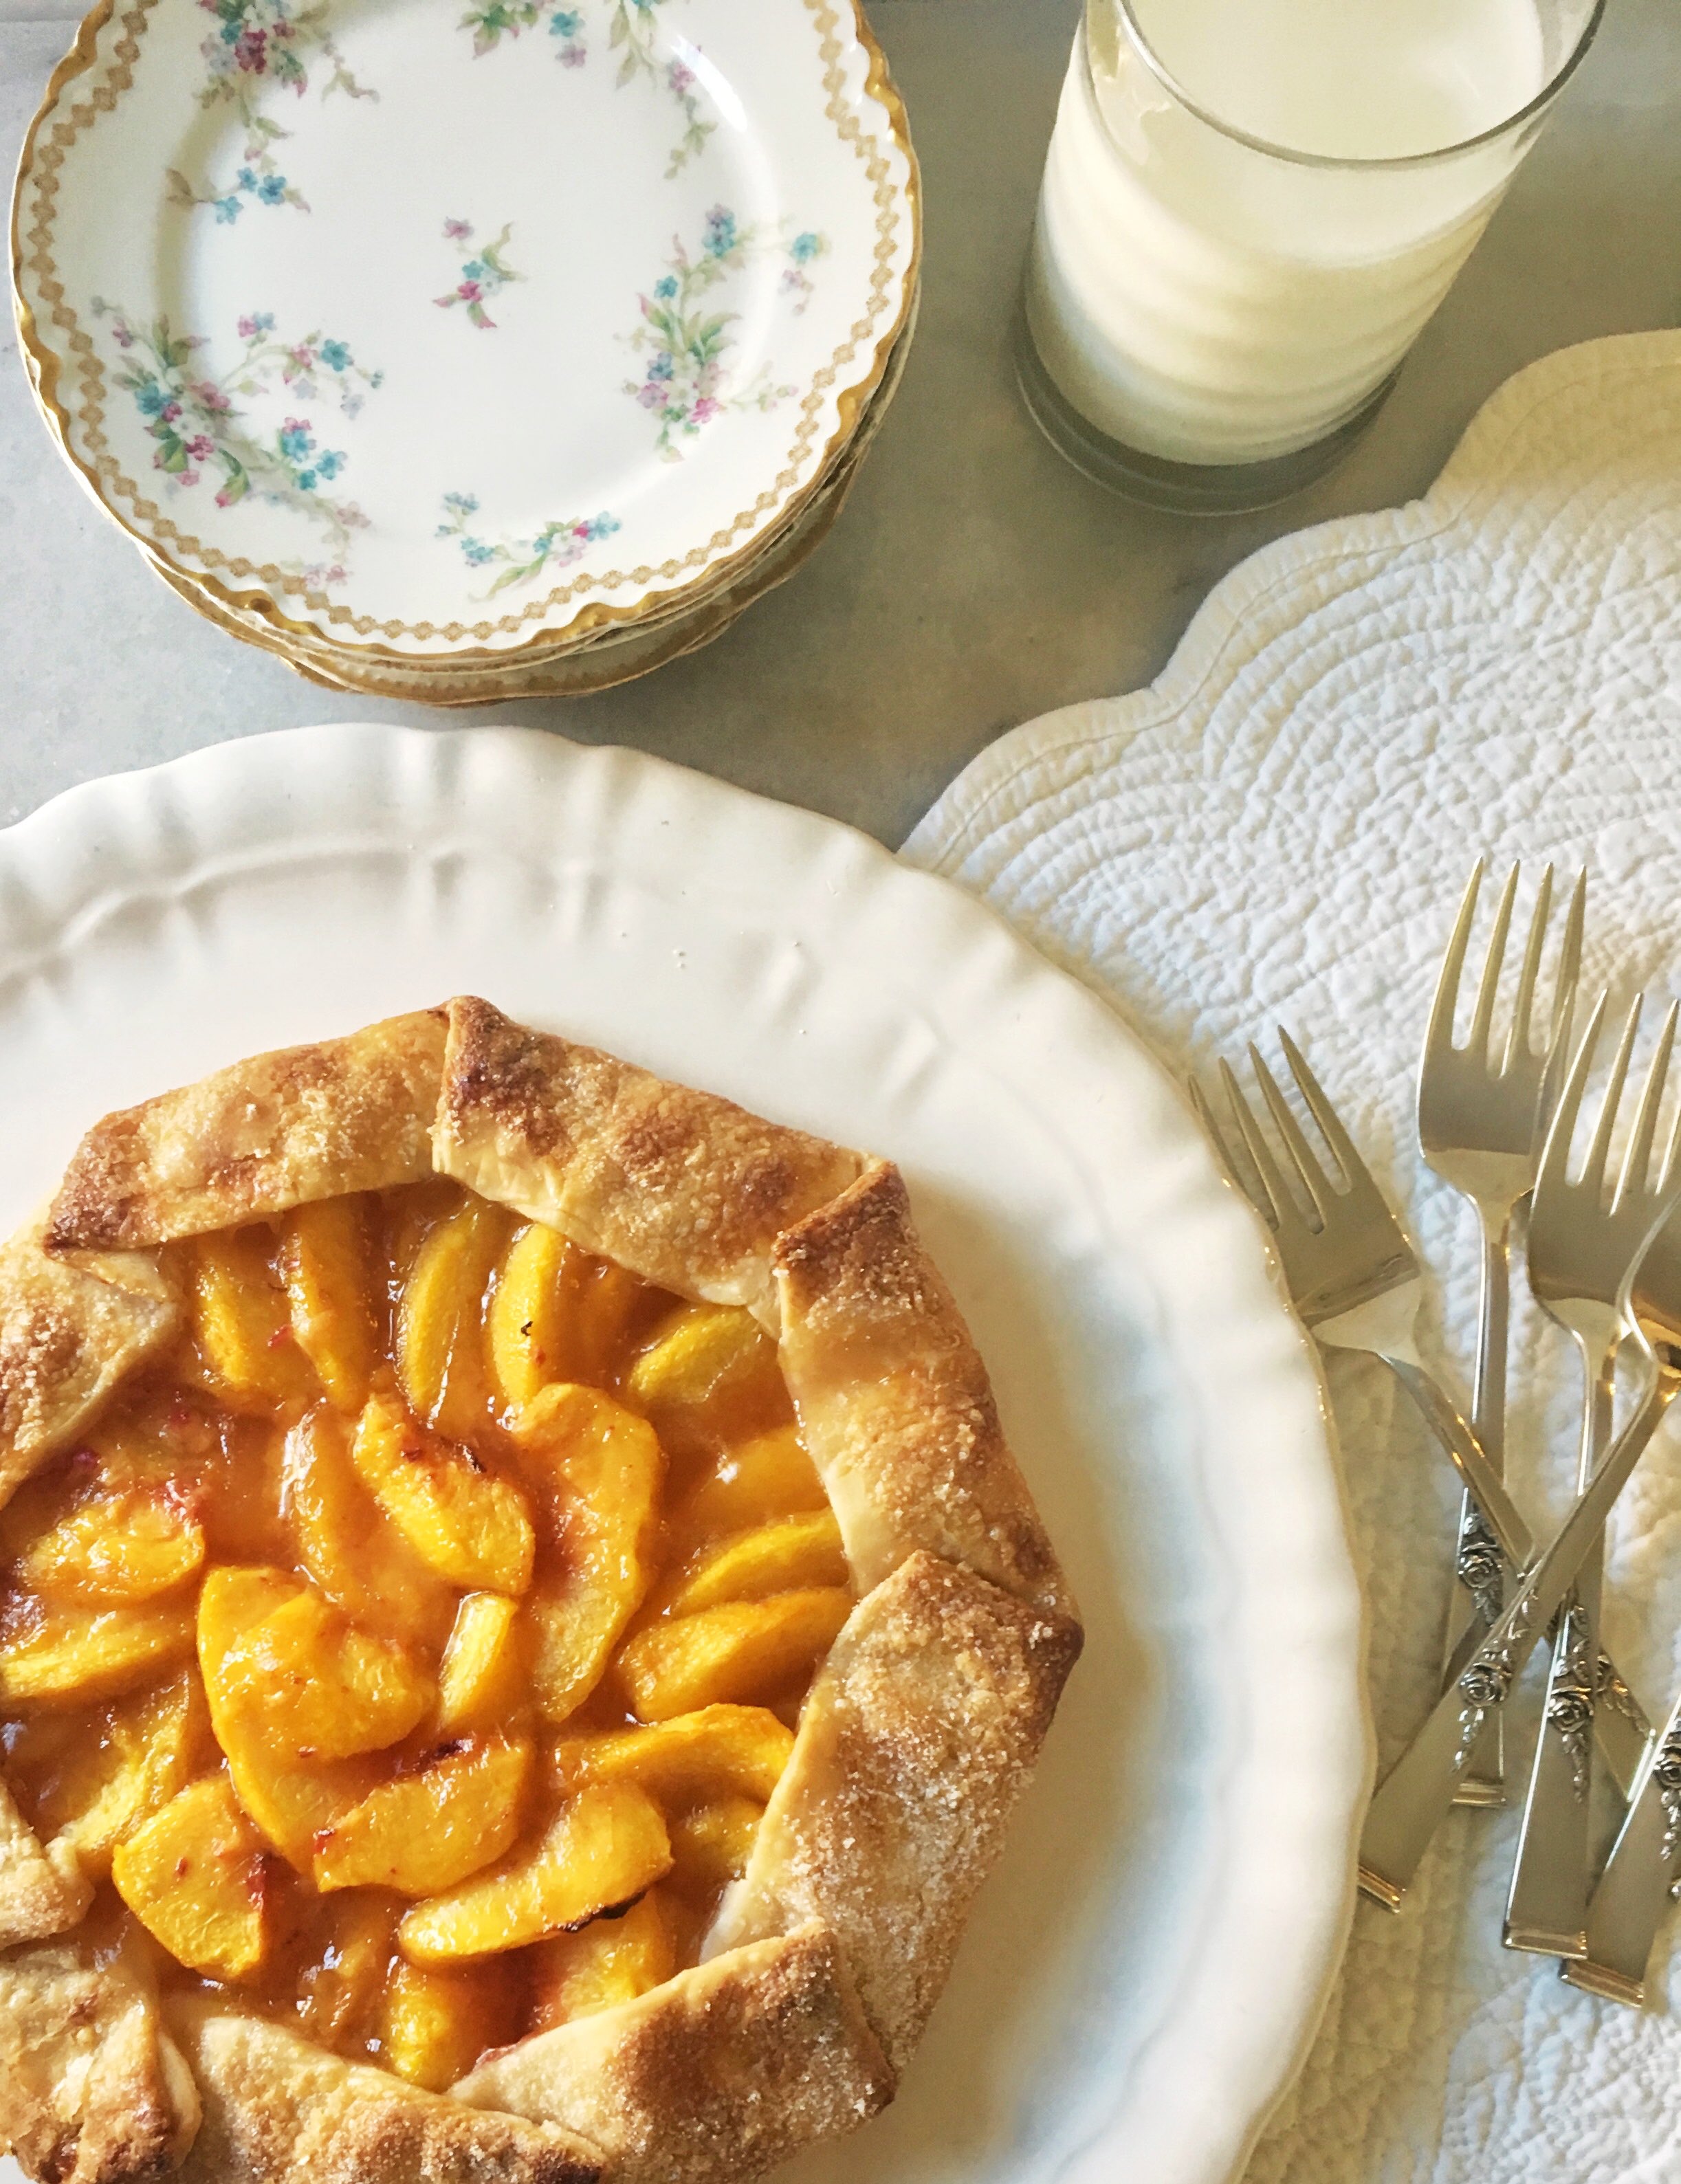 Peach Galette with serving plates and forks